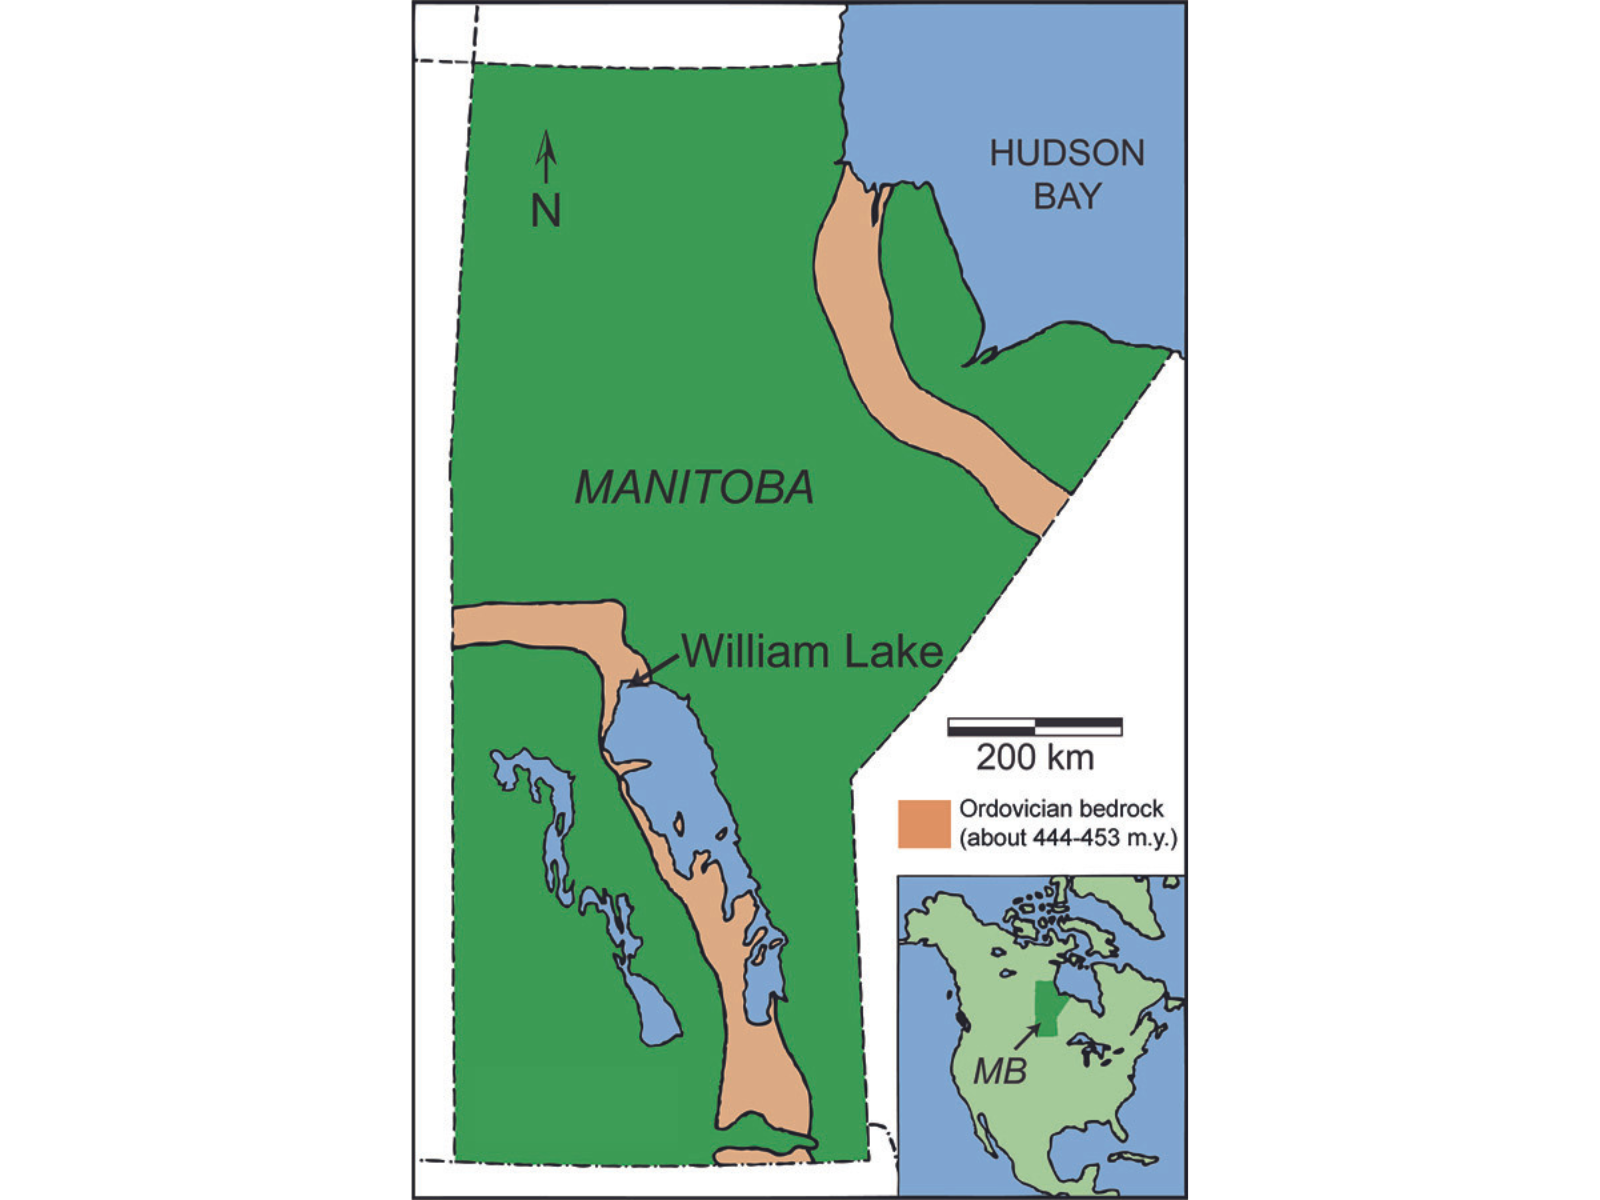 A map of Manitoba (green) showing an area of Ordovician bedrock (beige) and the location of William Lake (about centre of the province).